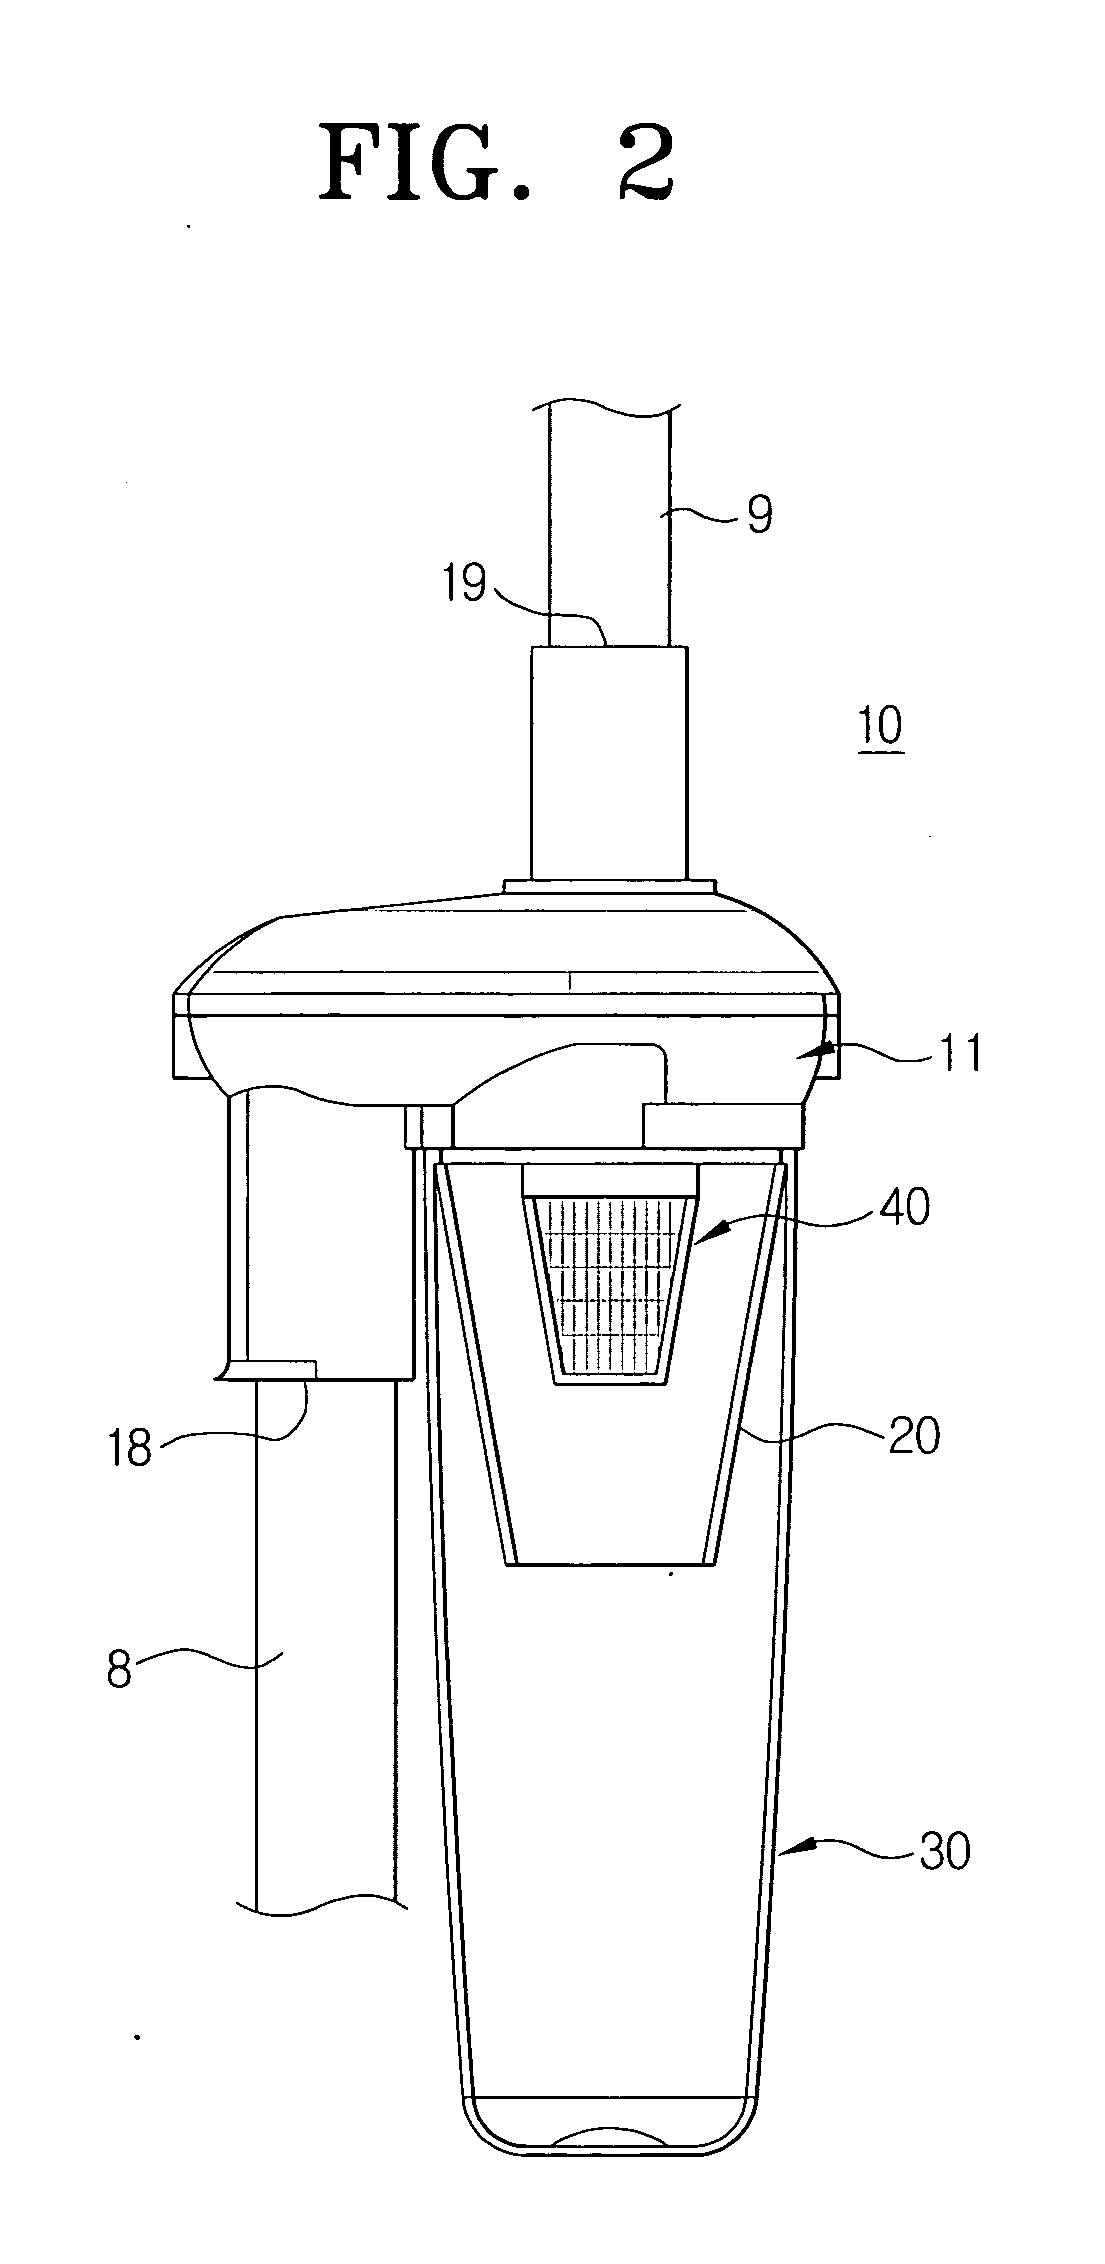 Cyclone dust collecting apparatus for vacuum cleaner